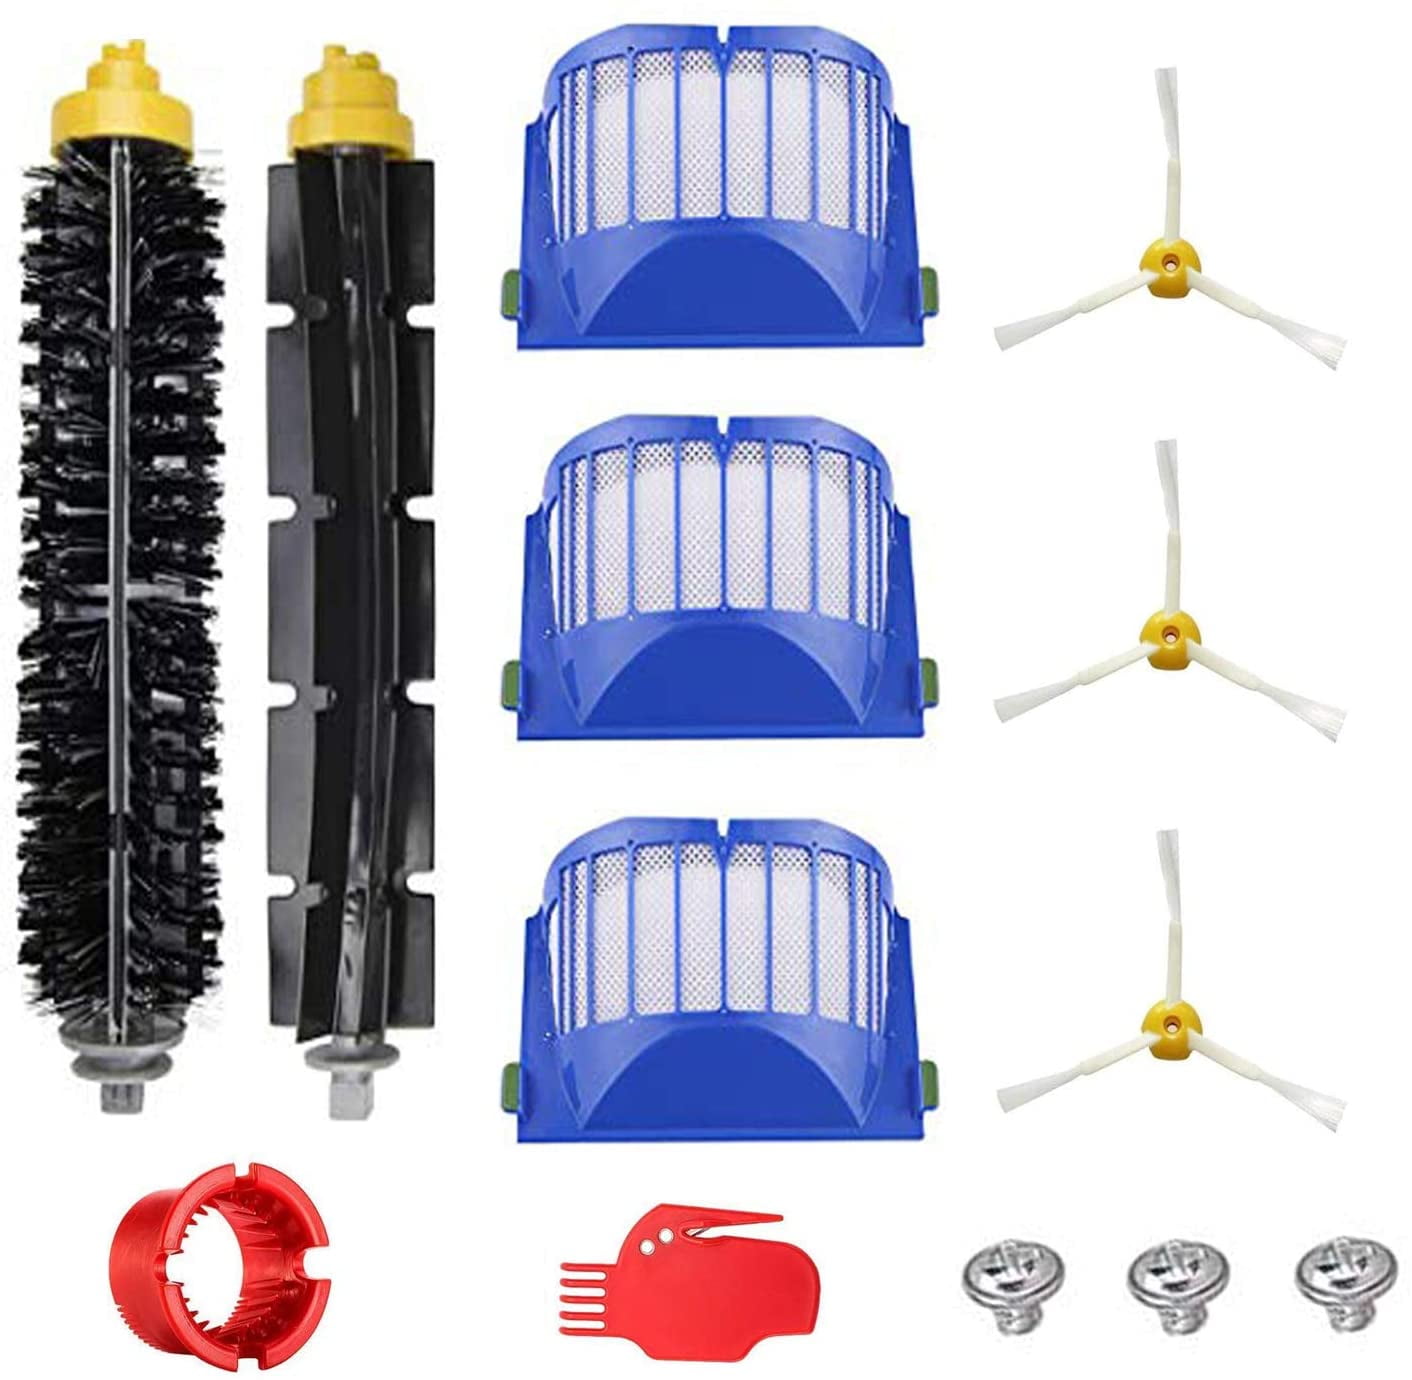 Replacement Filters Brushes Screws Kit for IRobot Roomba 600 614 650 660 675 680 690 Vacuum Including Filter/Cleaning Brush/Cleaning Bucket/Screws/Roller Brush/Side Brush